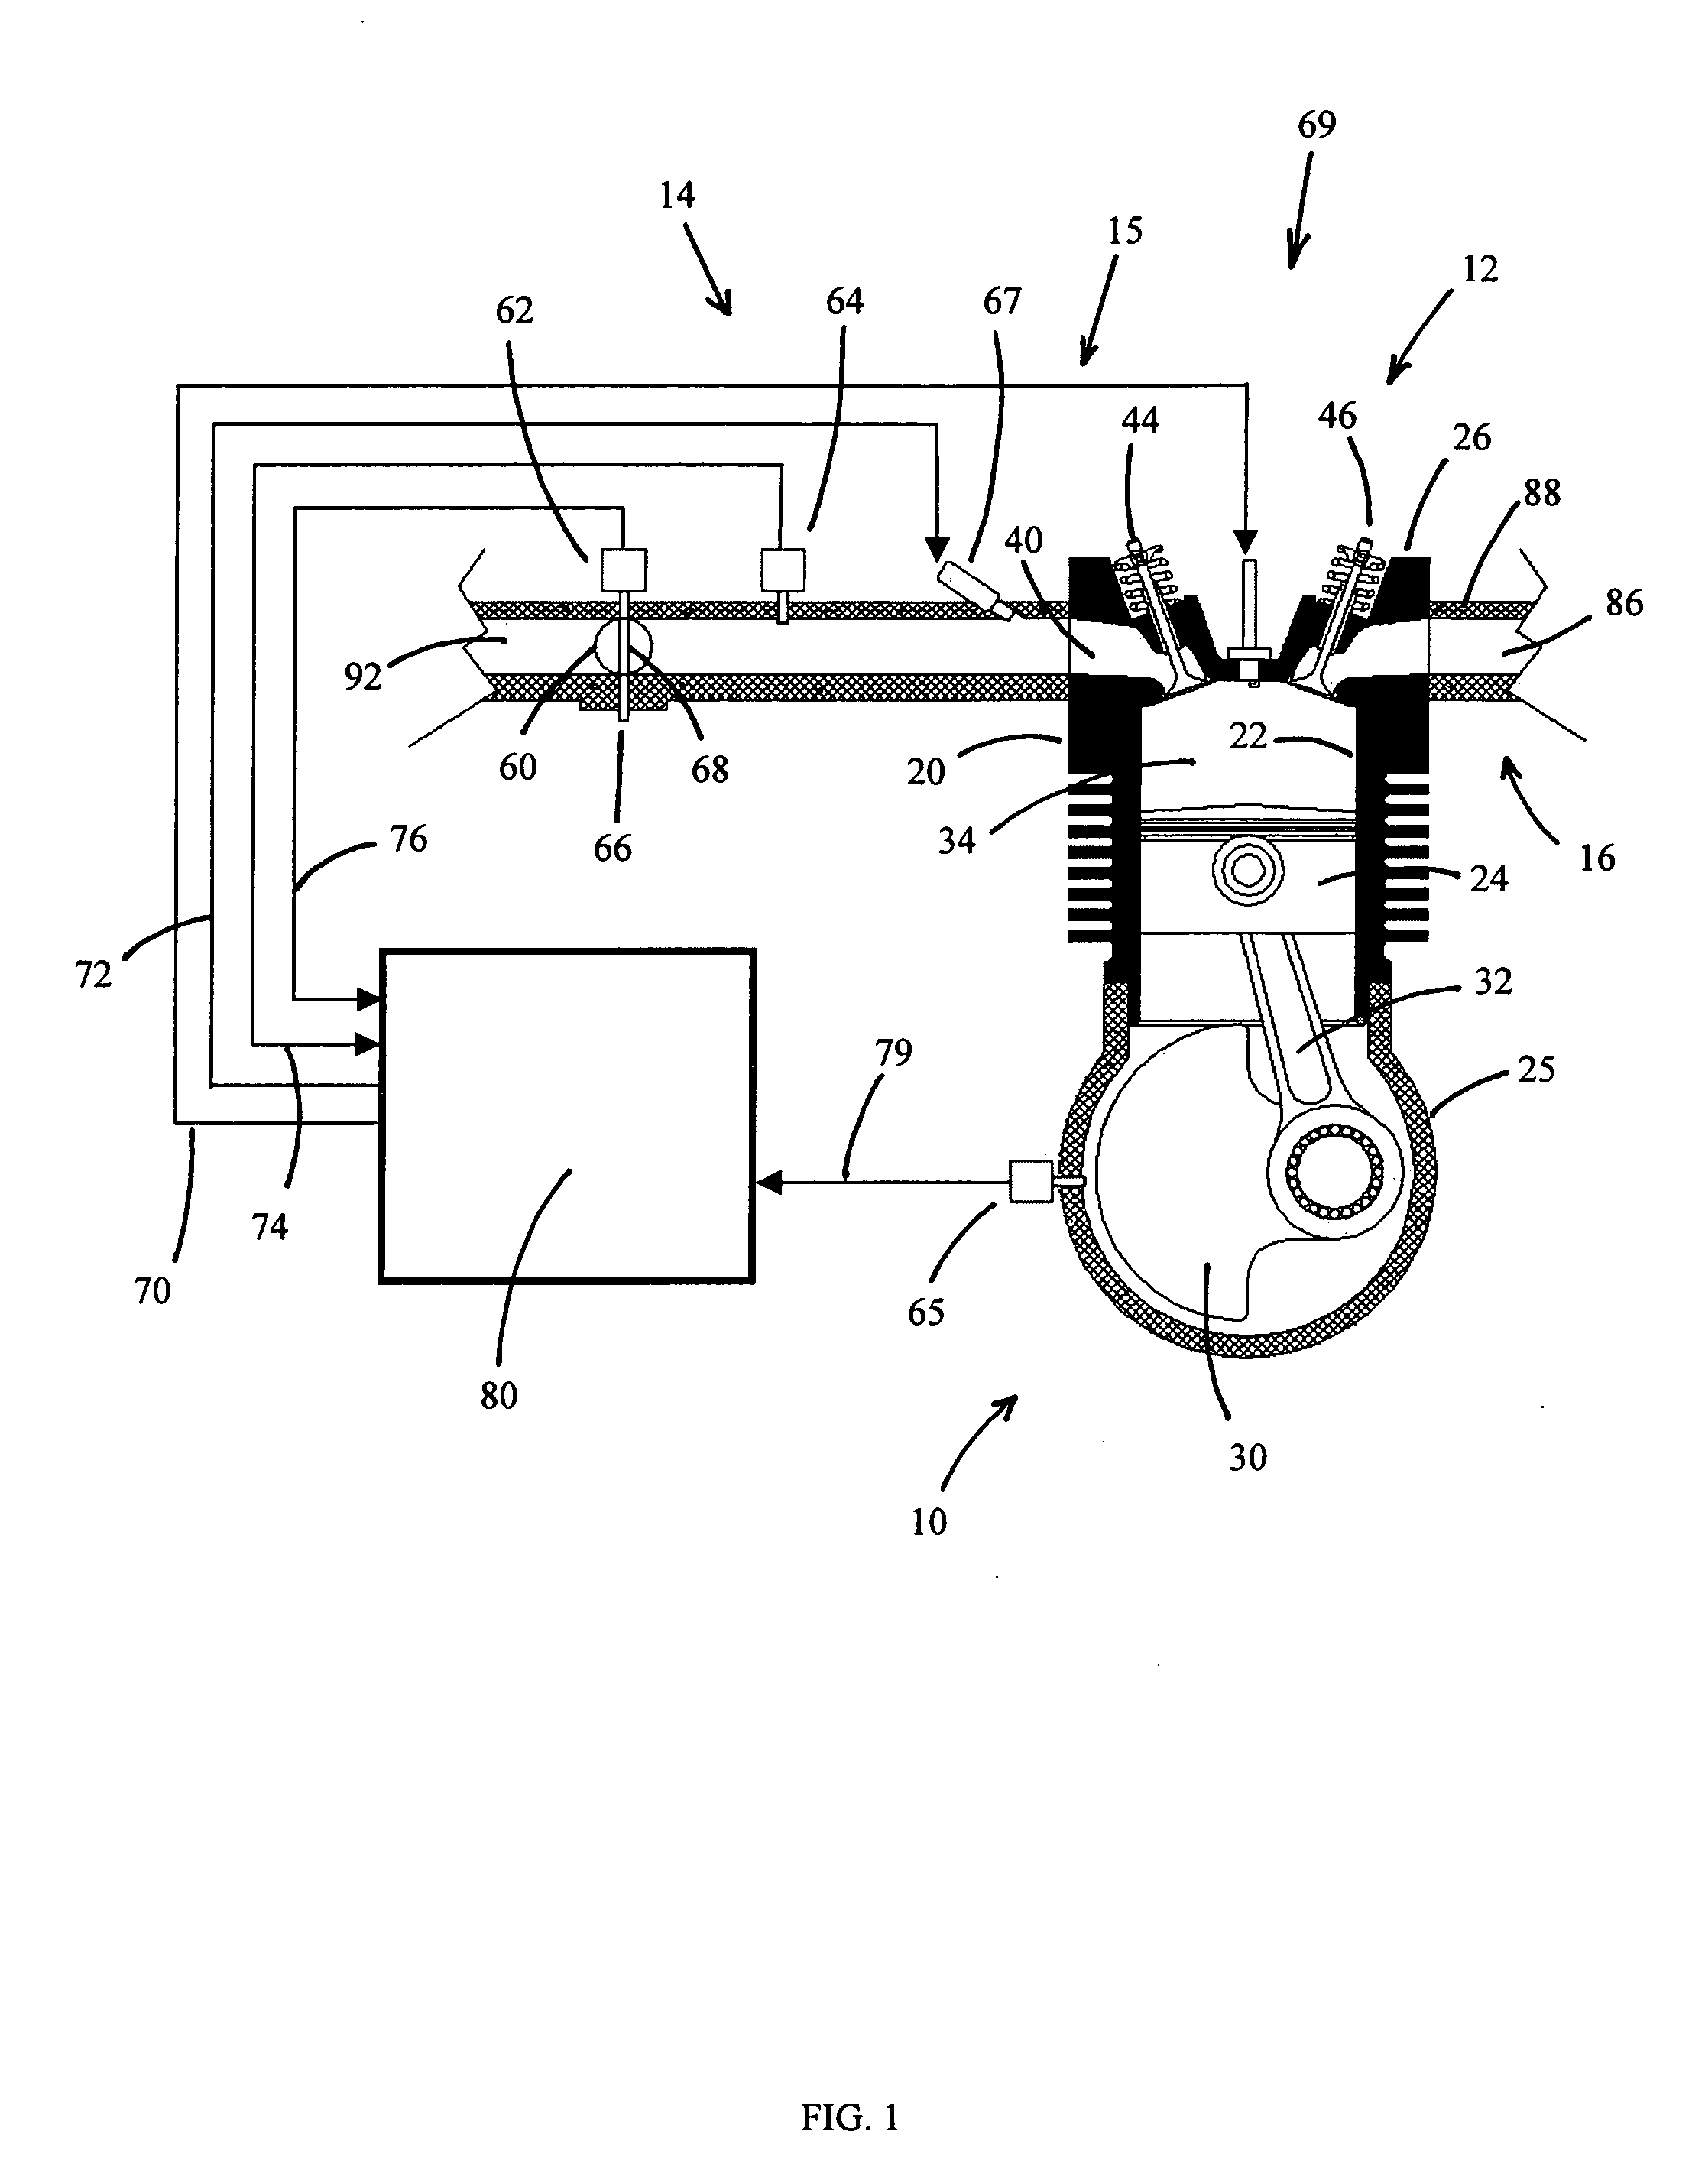 Electronic engine control with reduced sensor set